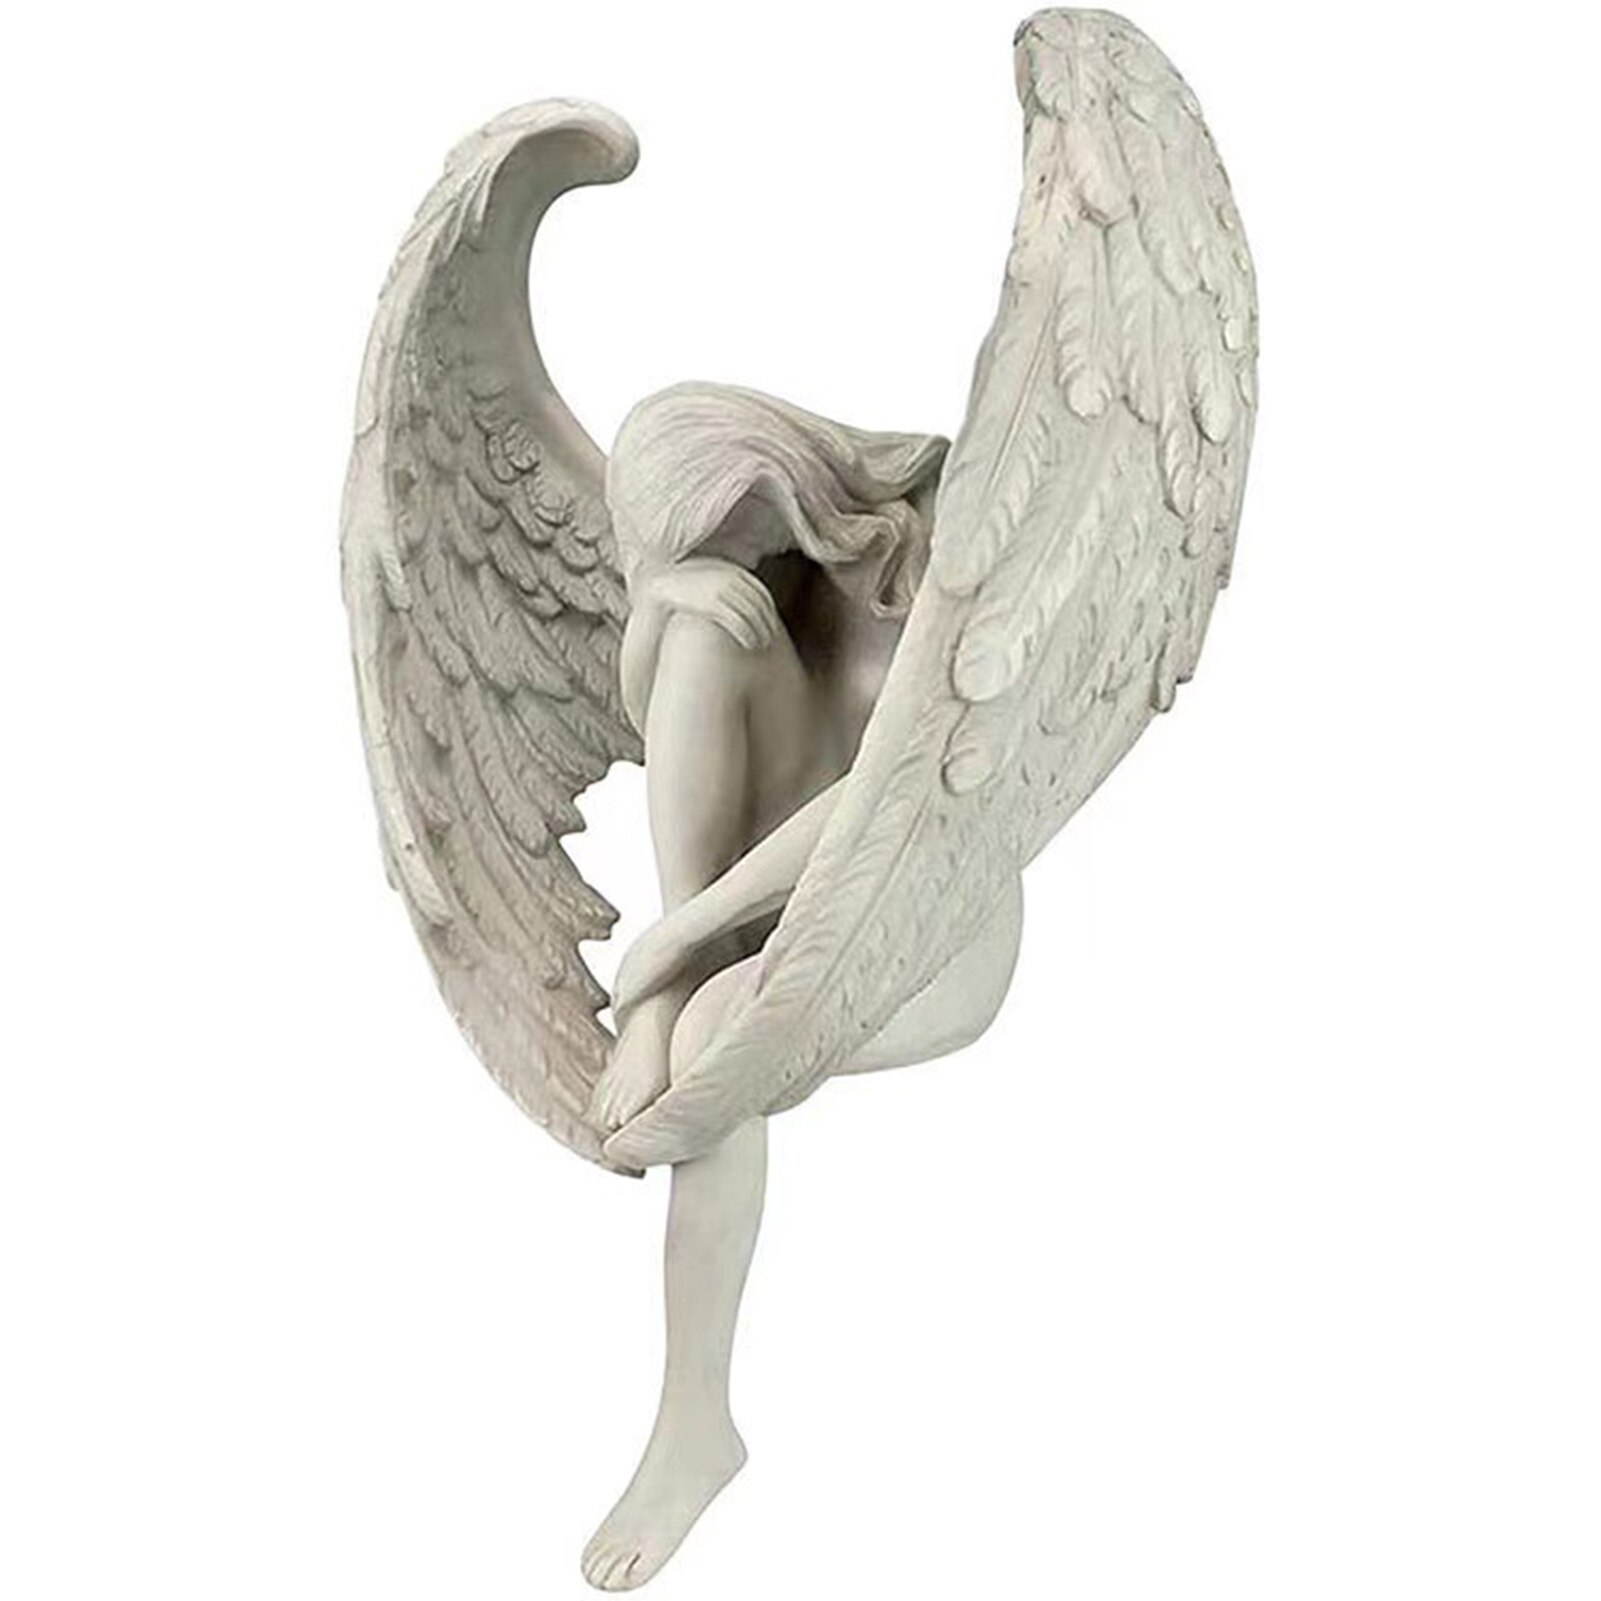 The Anguished Angel Long-Winged Sitting Statue Resin Sorrowful Figure Memorial Cemetery Statues Crying Garden Outdoor Decoration